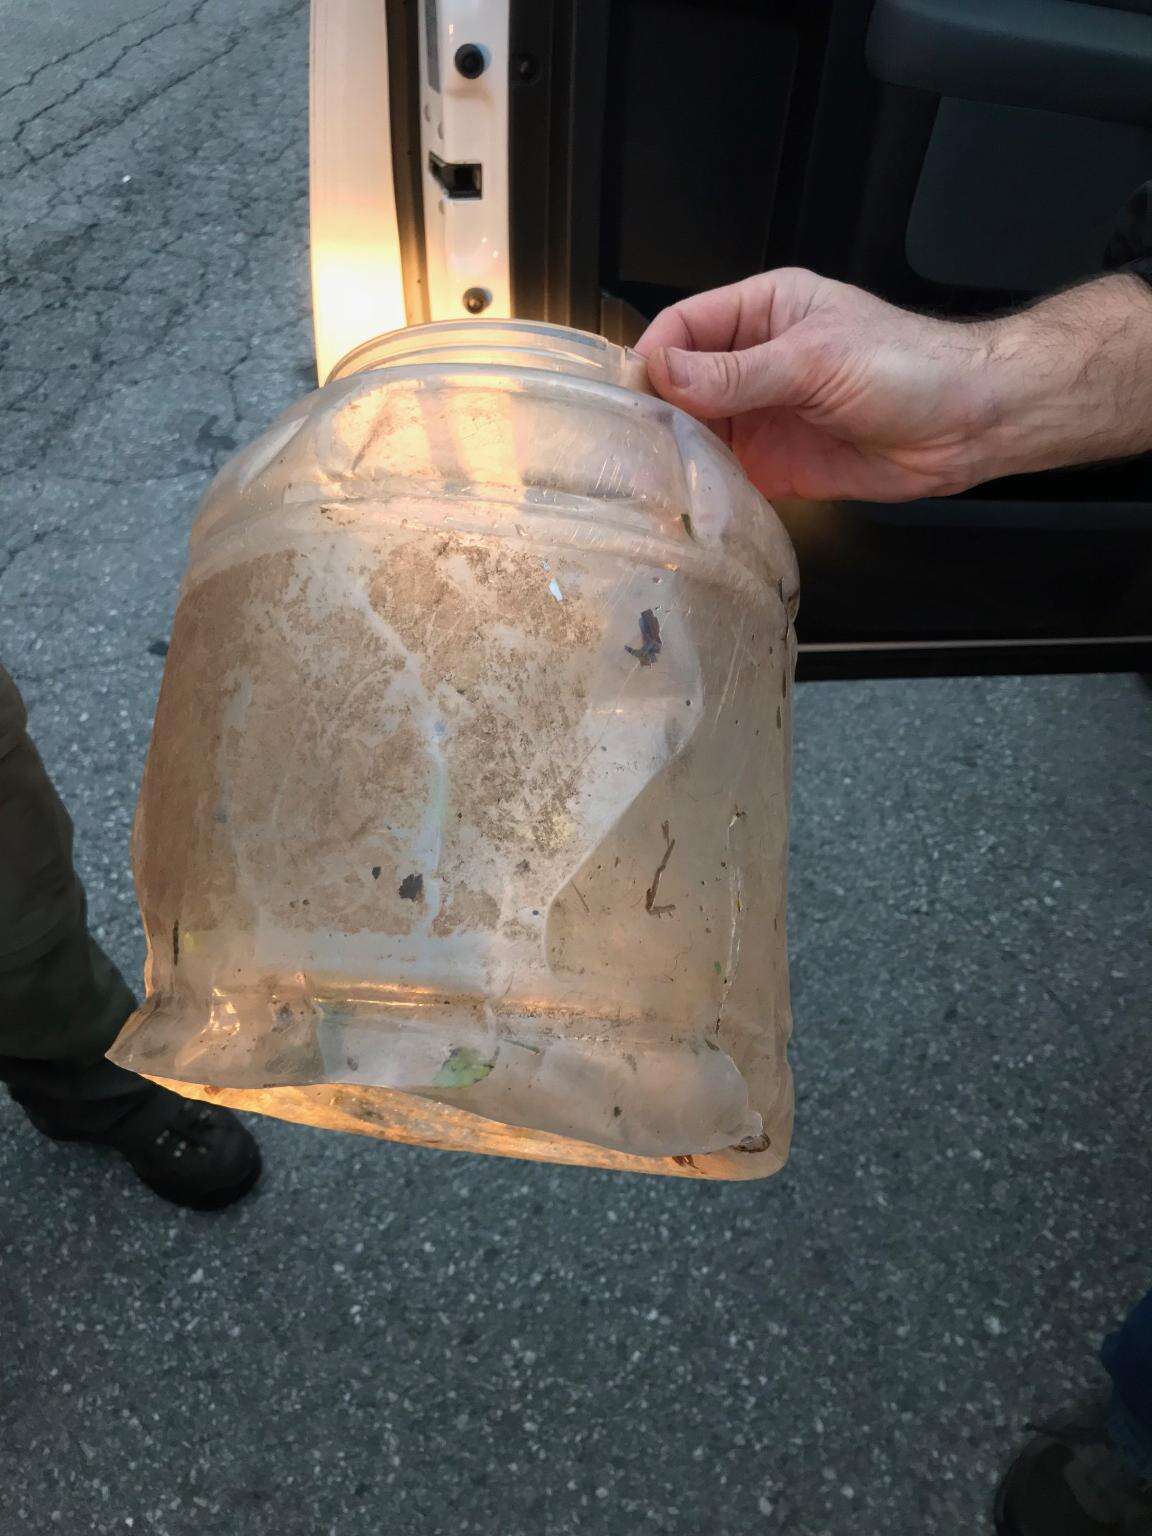 Plastic jar removed from bear cub's head in Maryland